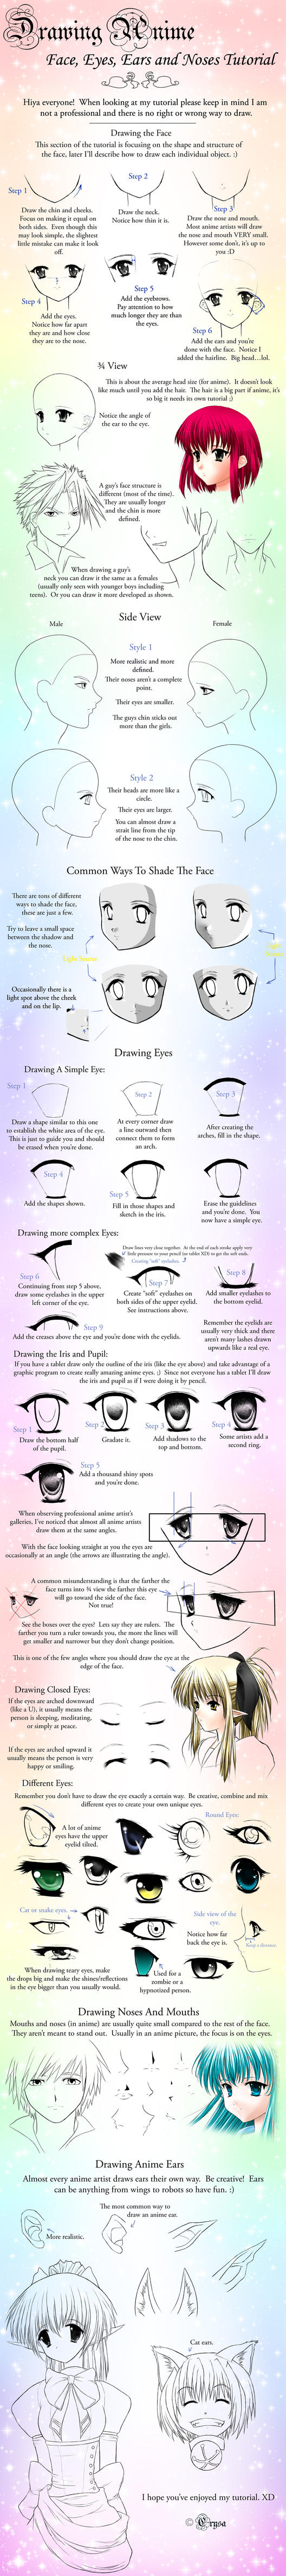 Drawing Anime Faces Tutorial